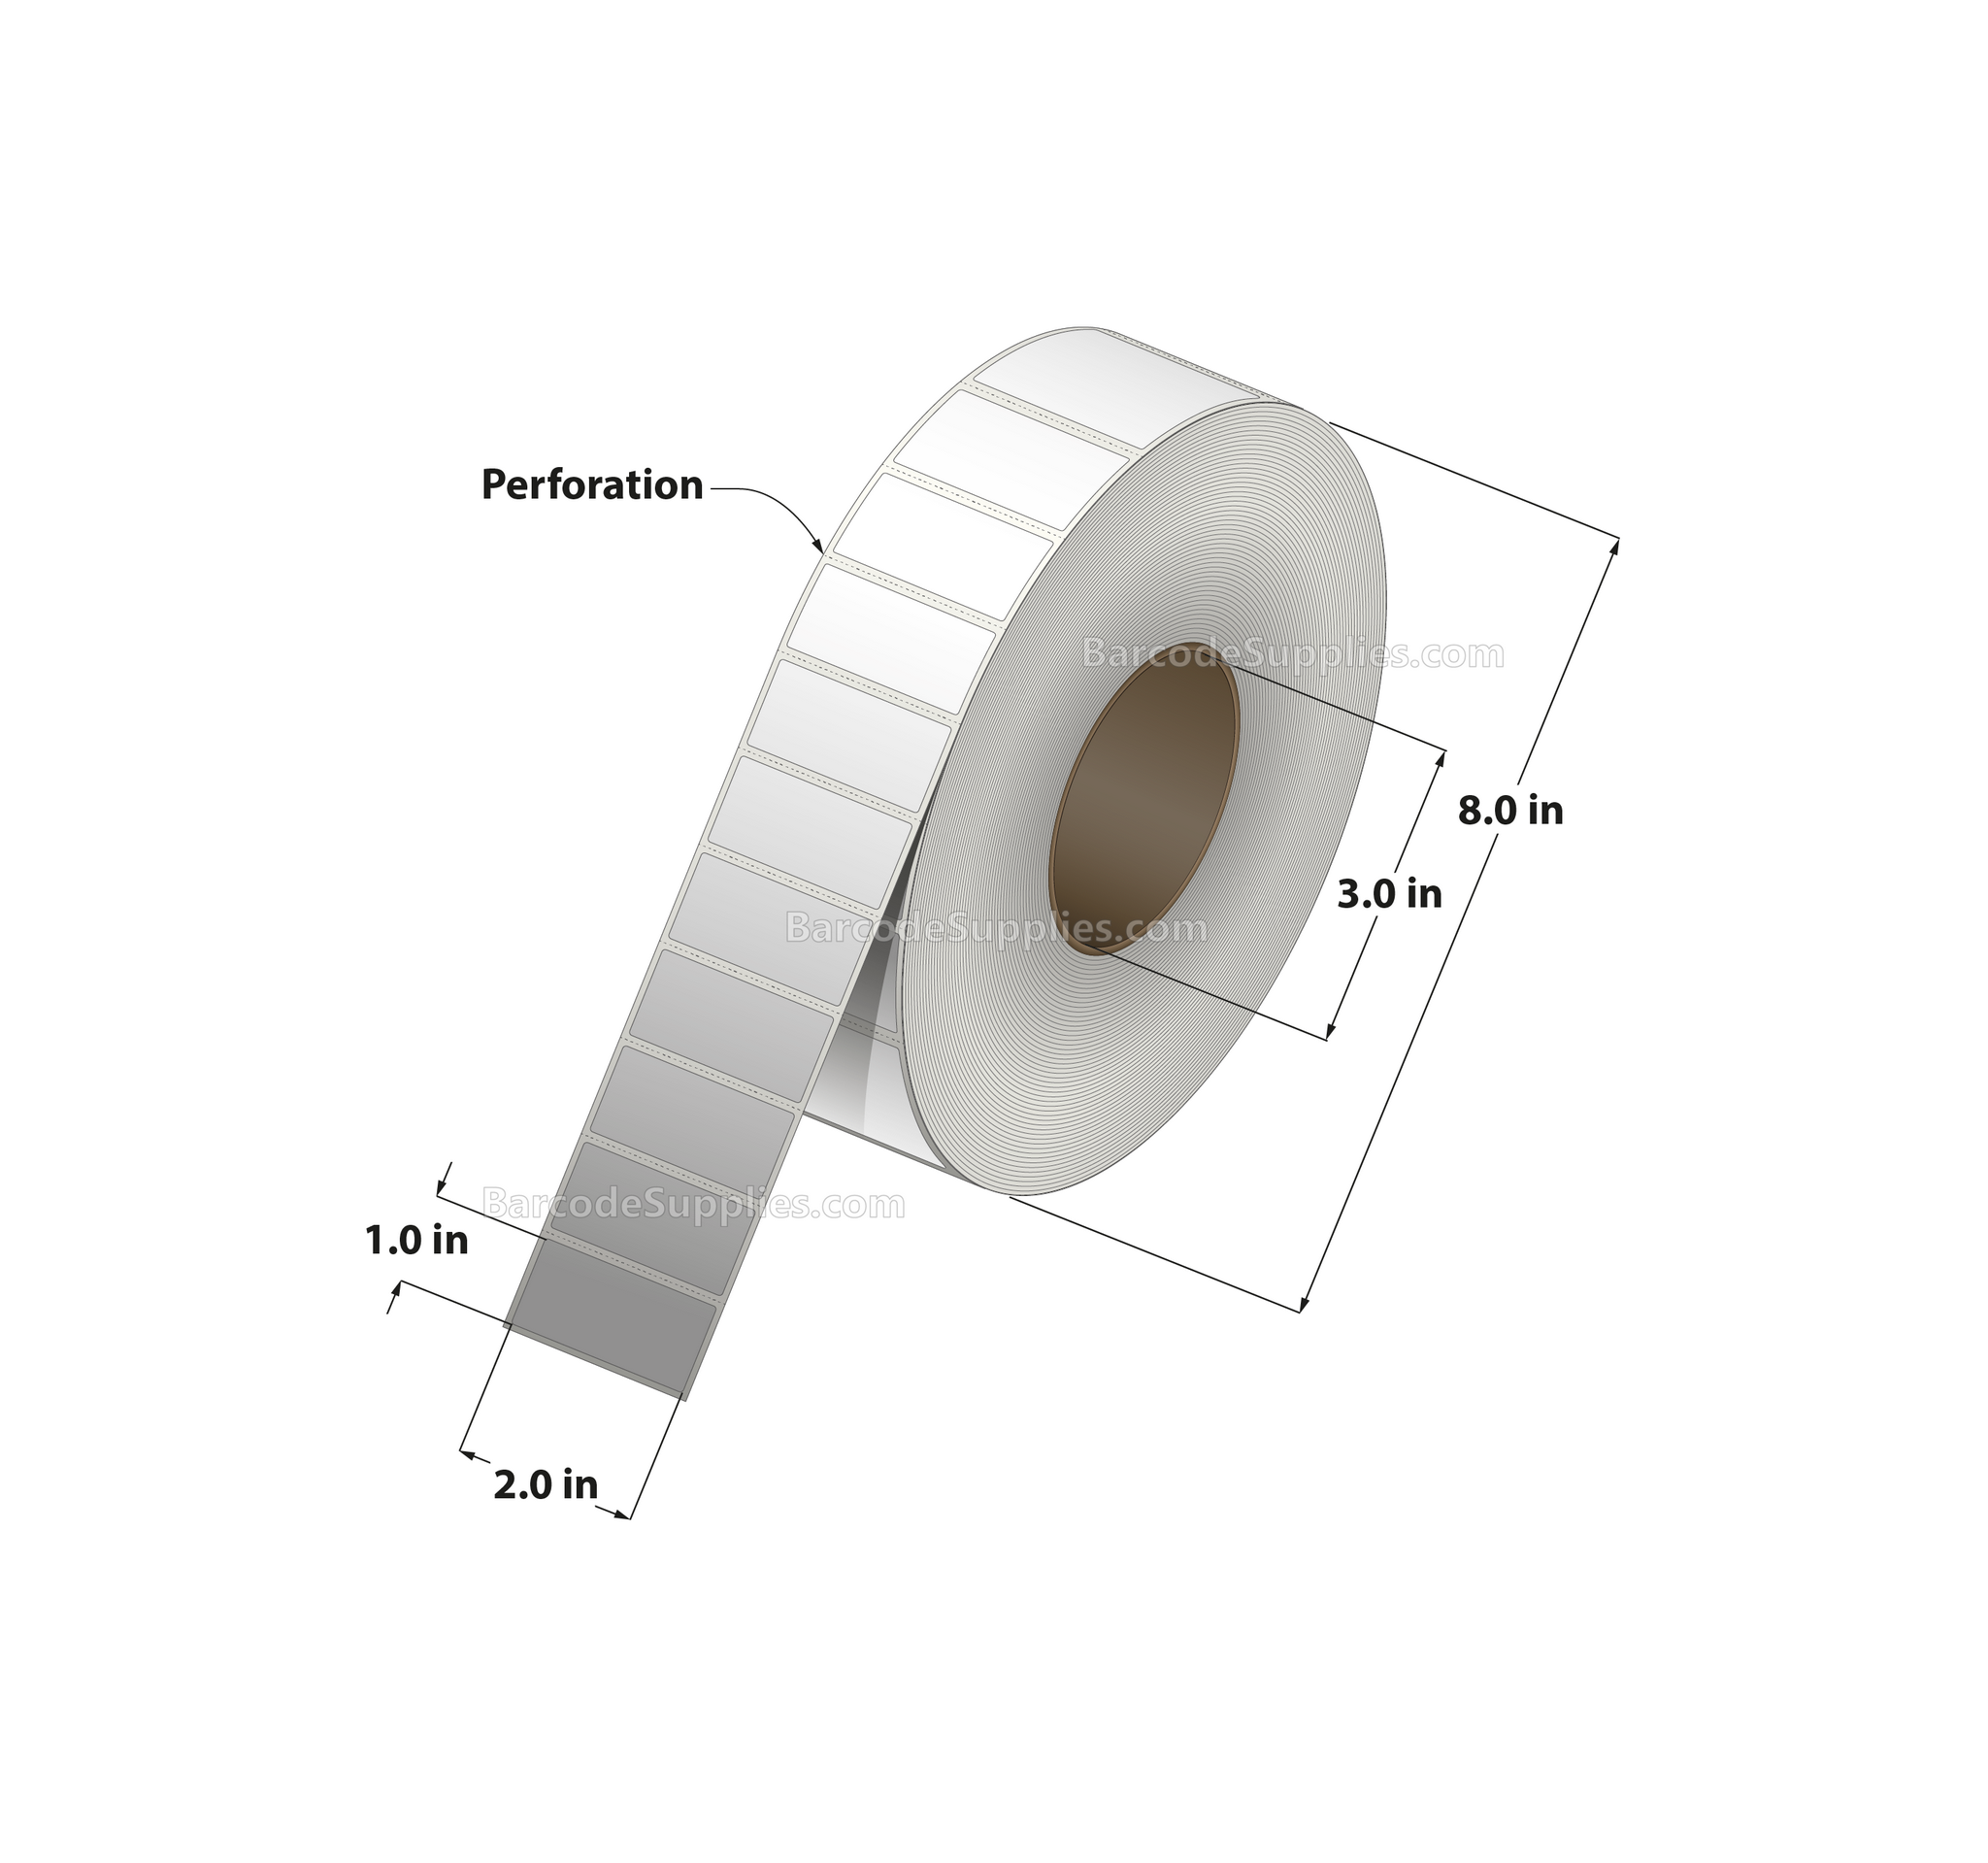 2 x 1 Thermal Transfer White Labels With Permanent Adhesive - Perforated - 5500 Labels Per Roll - Carton Of 8 Rolls - 44000 Labels Total - MPN: RT-2-1-5500-3